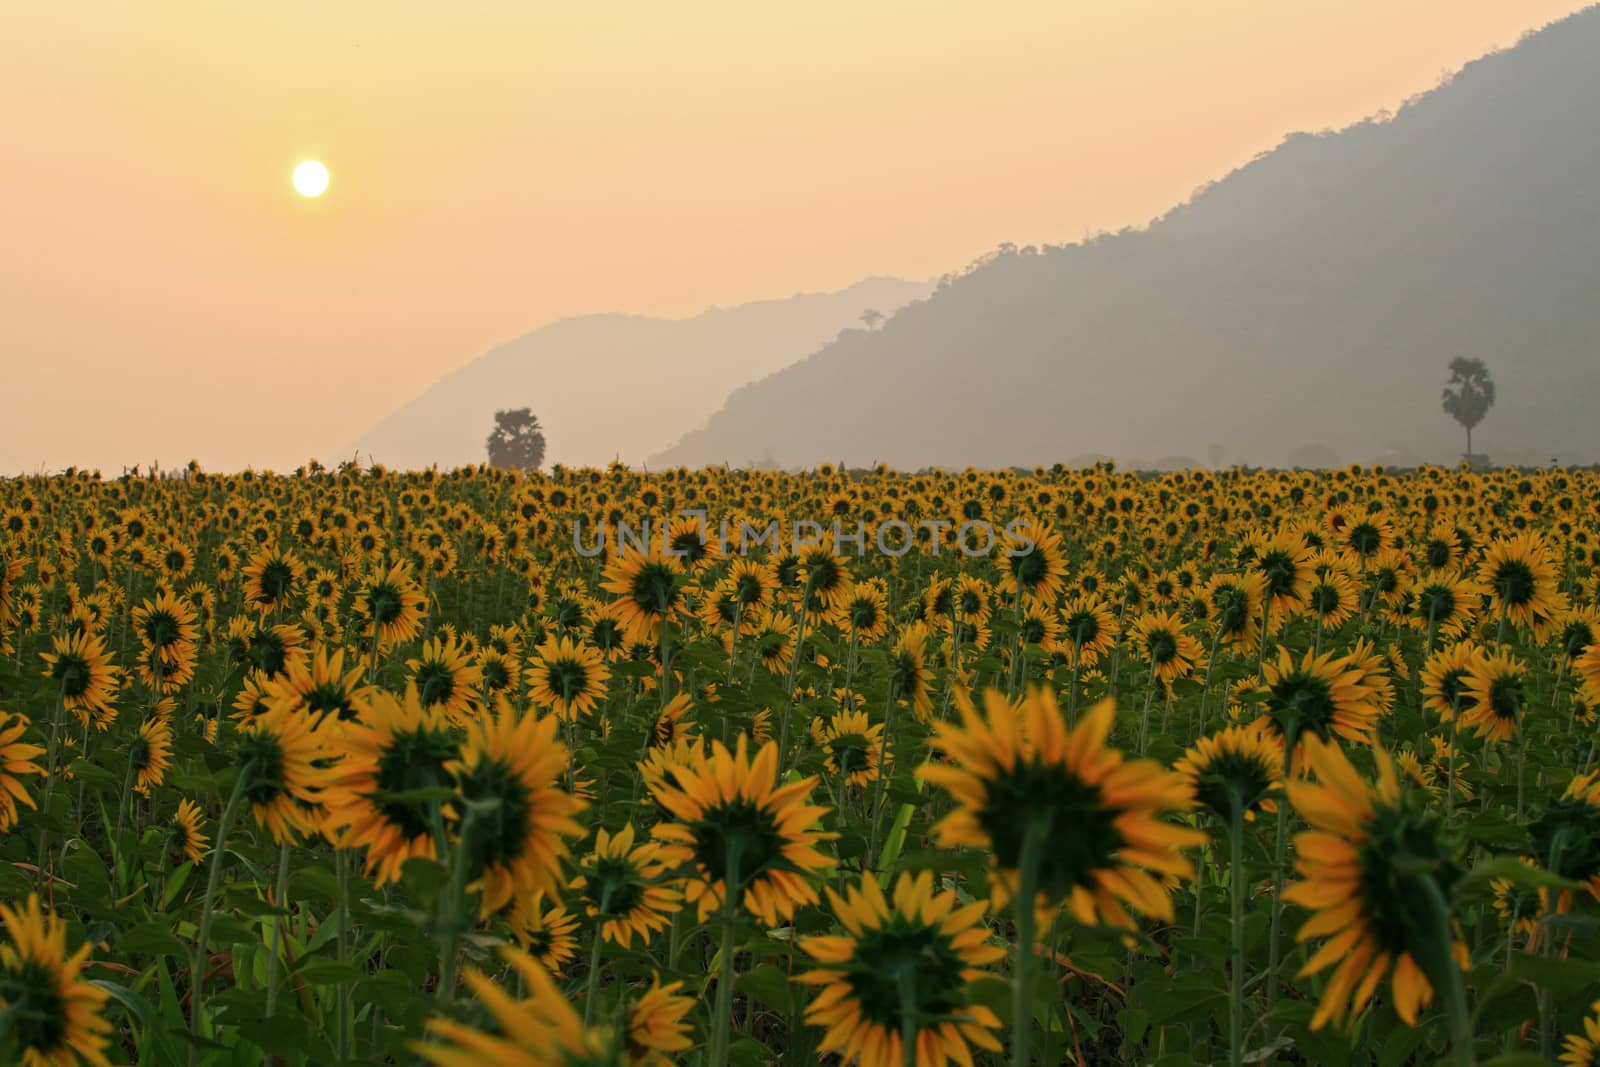 Sunflower sunrise in the winter in Thailand by think4photop